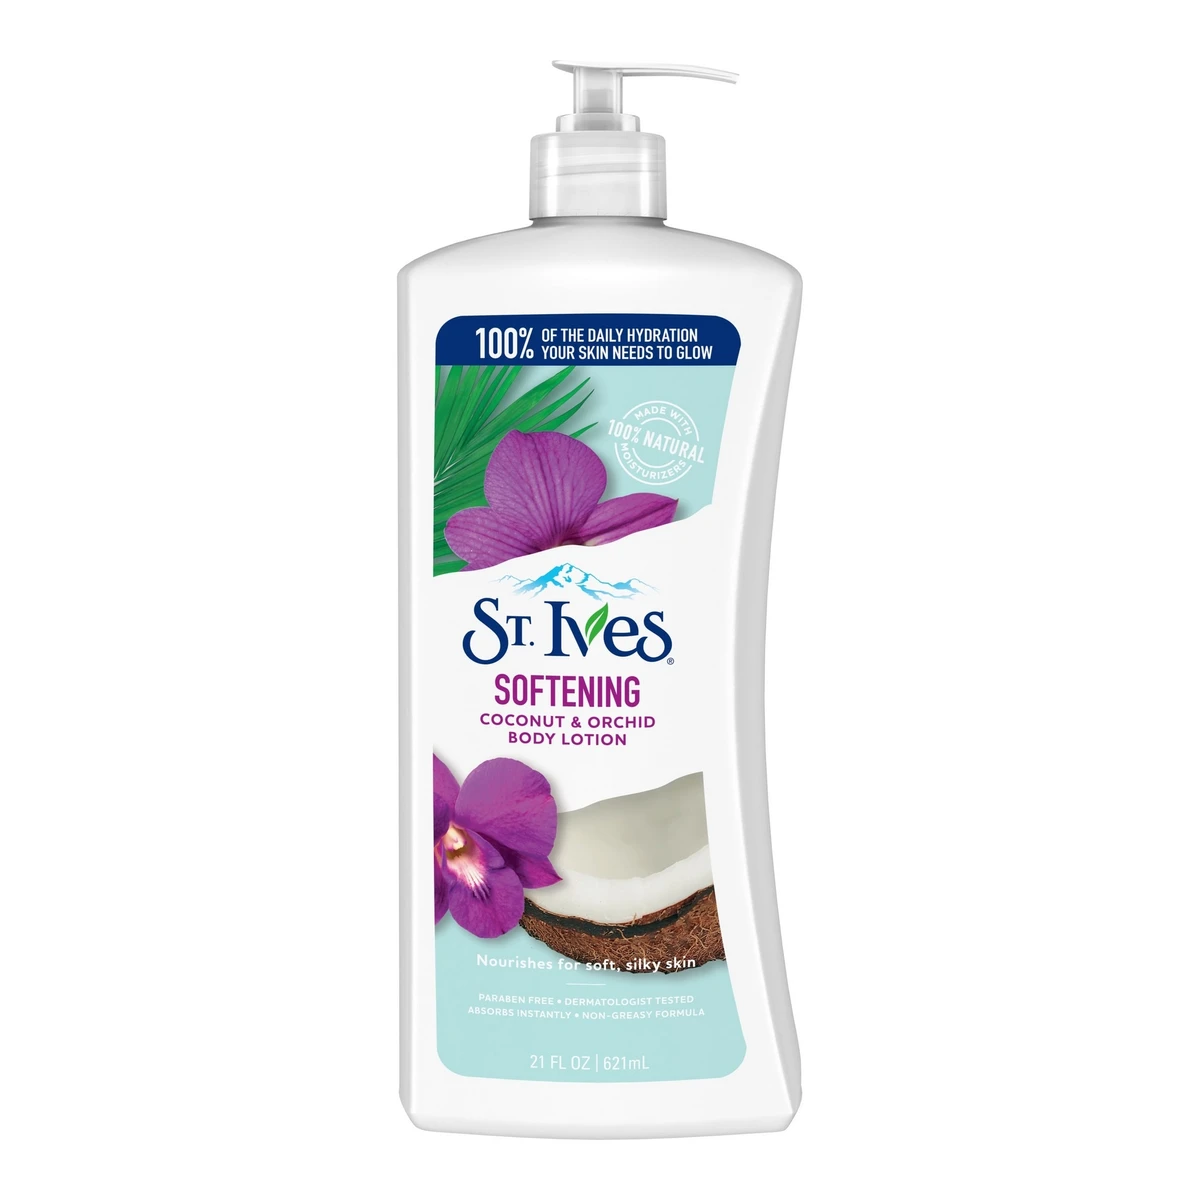 St. Ives Soft & Silky Coconut & Orchid Body Lotion 21 oz